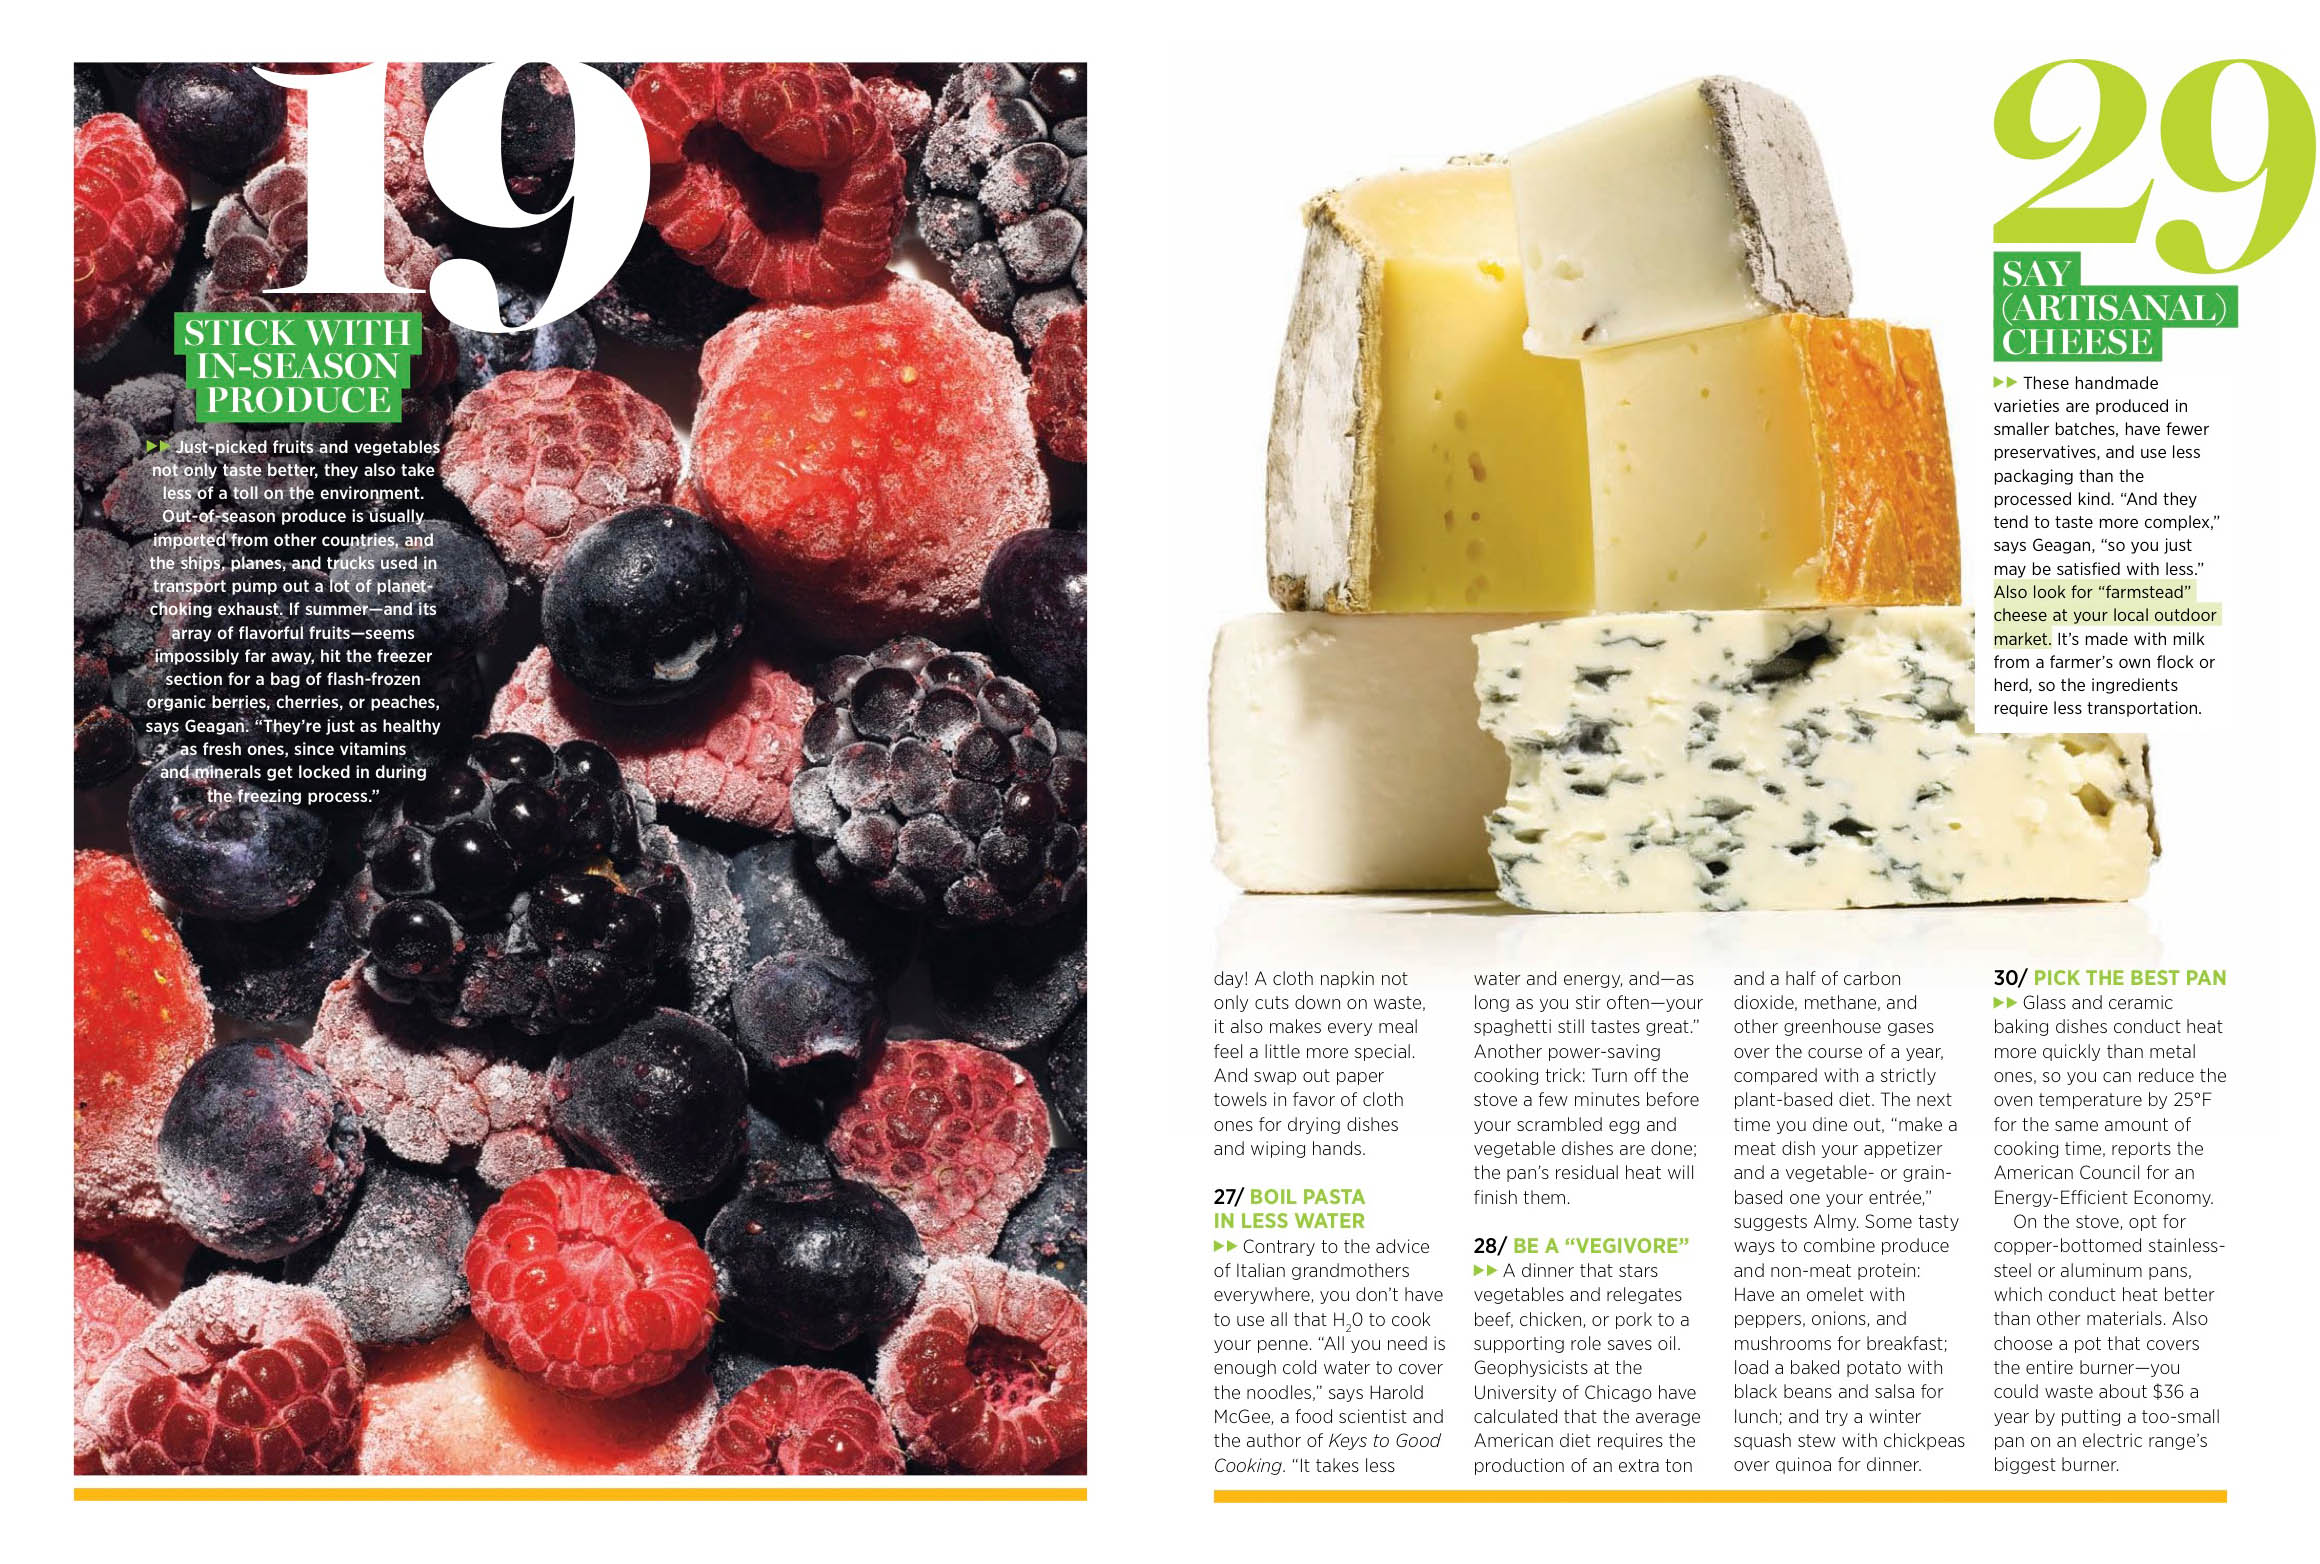 30 Ways to Green Your Plate, November 2011